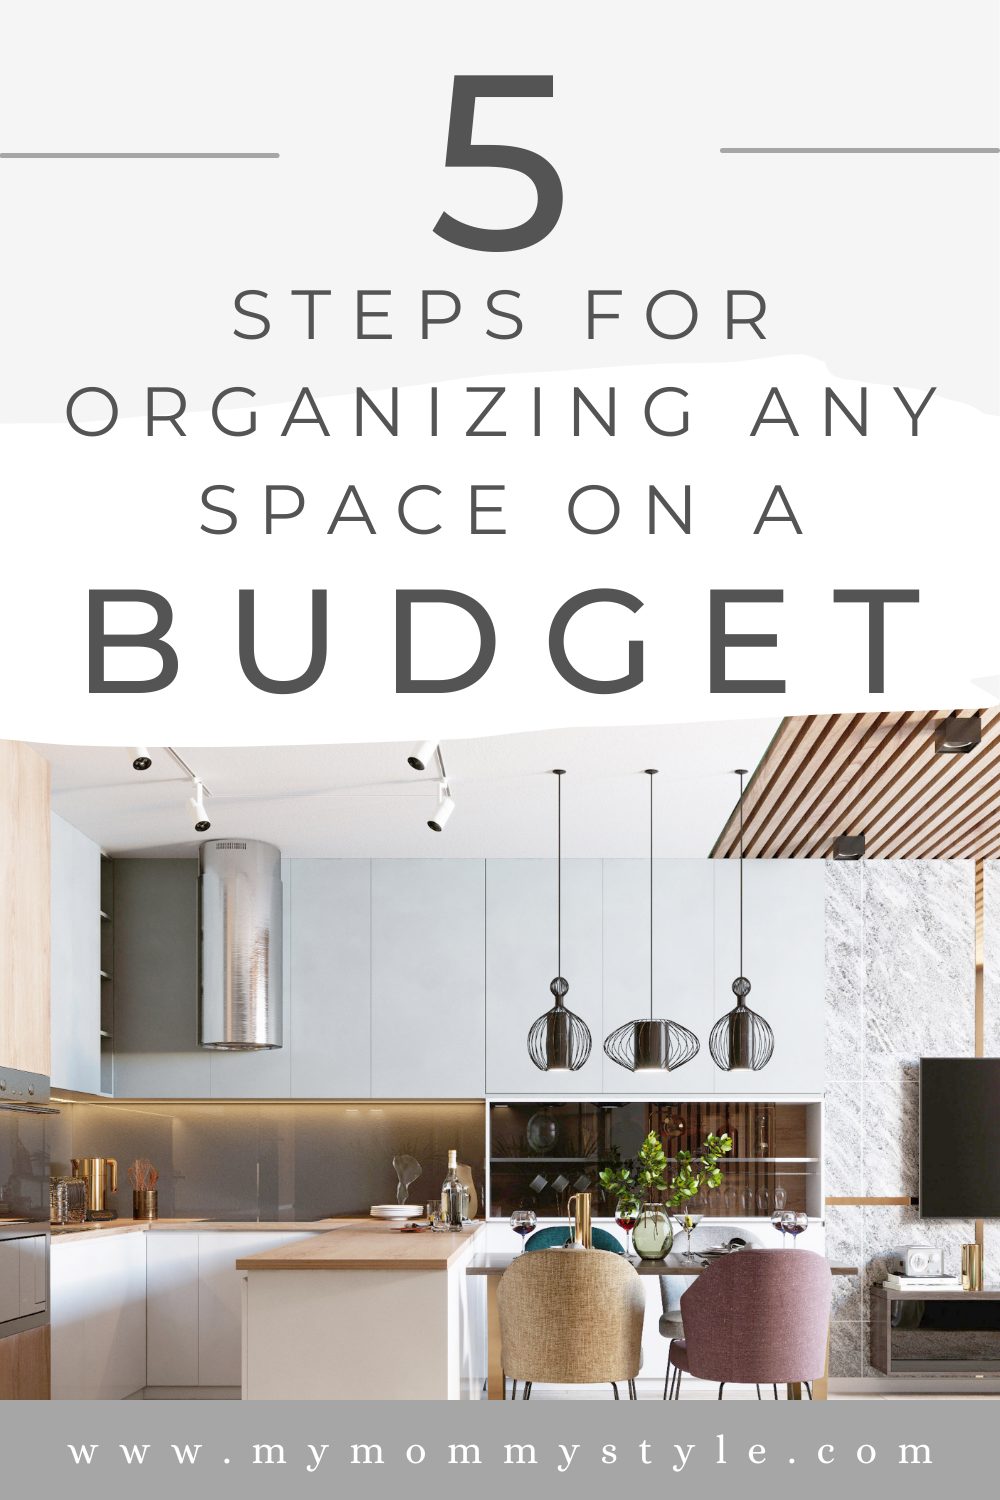 https://www.mymommystyle.com/wp-content/uploads/2023/07/25-35854-post/steps-for-organizing-any-space-on-a-budget.jpg